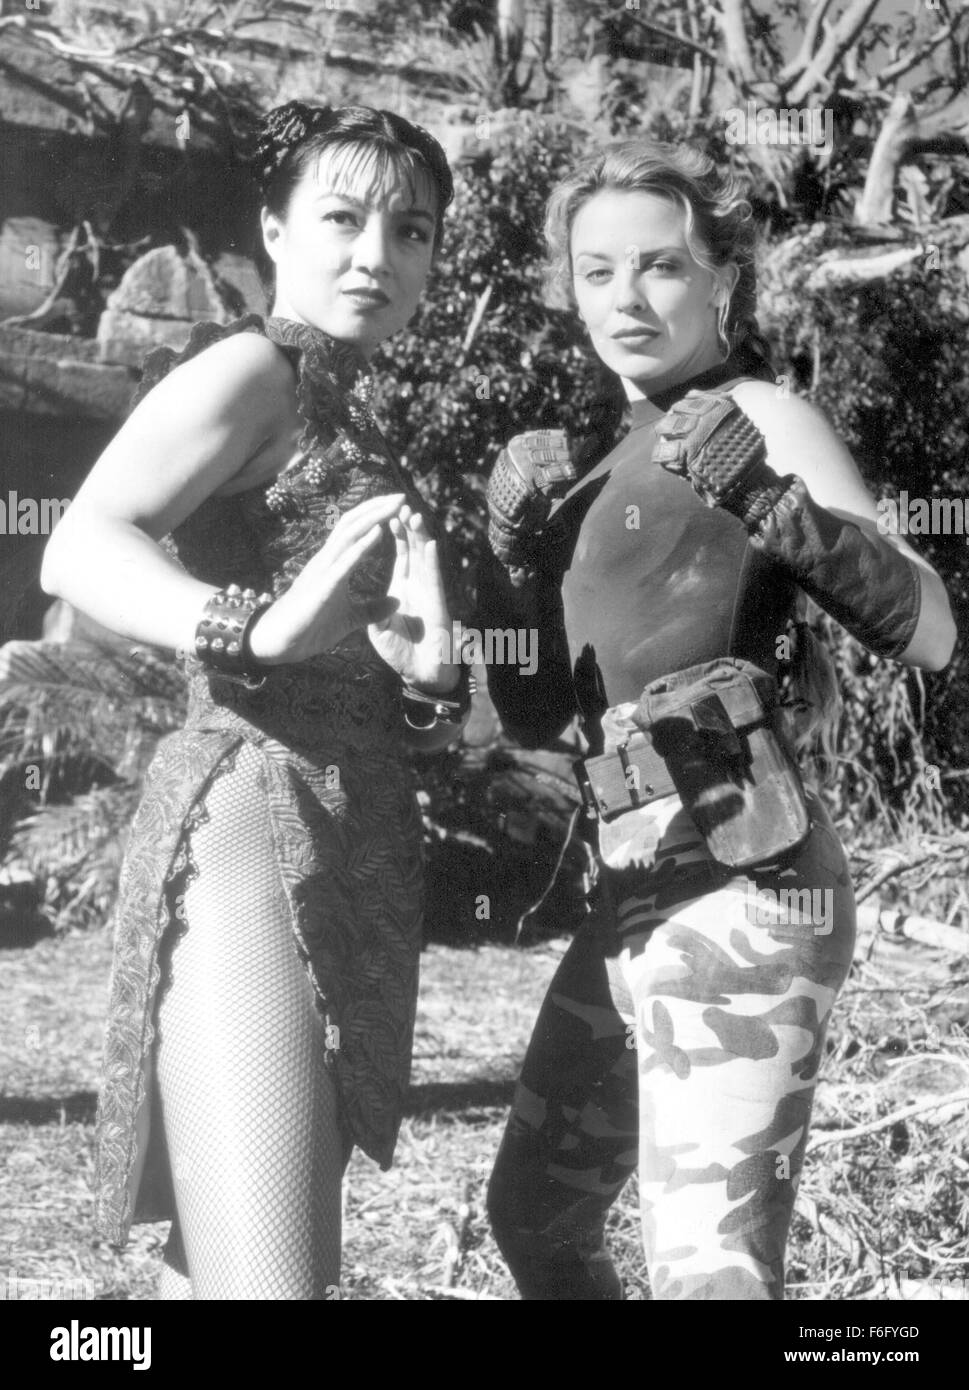 Live For Films - Ming-Na Wen as Chun-Li and Kylie Minogue as Cammy - Street  Fighter - 1994 #streetfighter #mingnawen #chunli #kylieminogue #cammy #film  #movie #videogame #beatemup #promo #nineties #90s